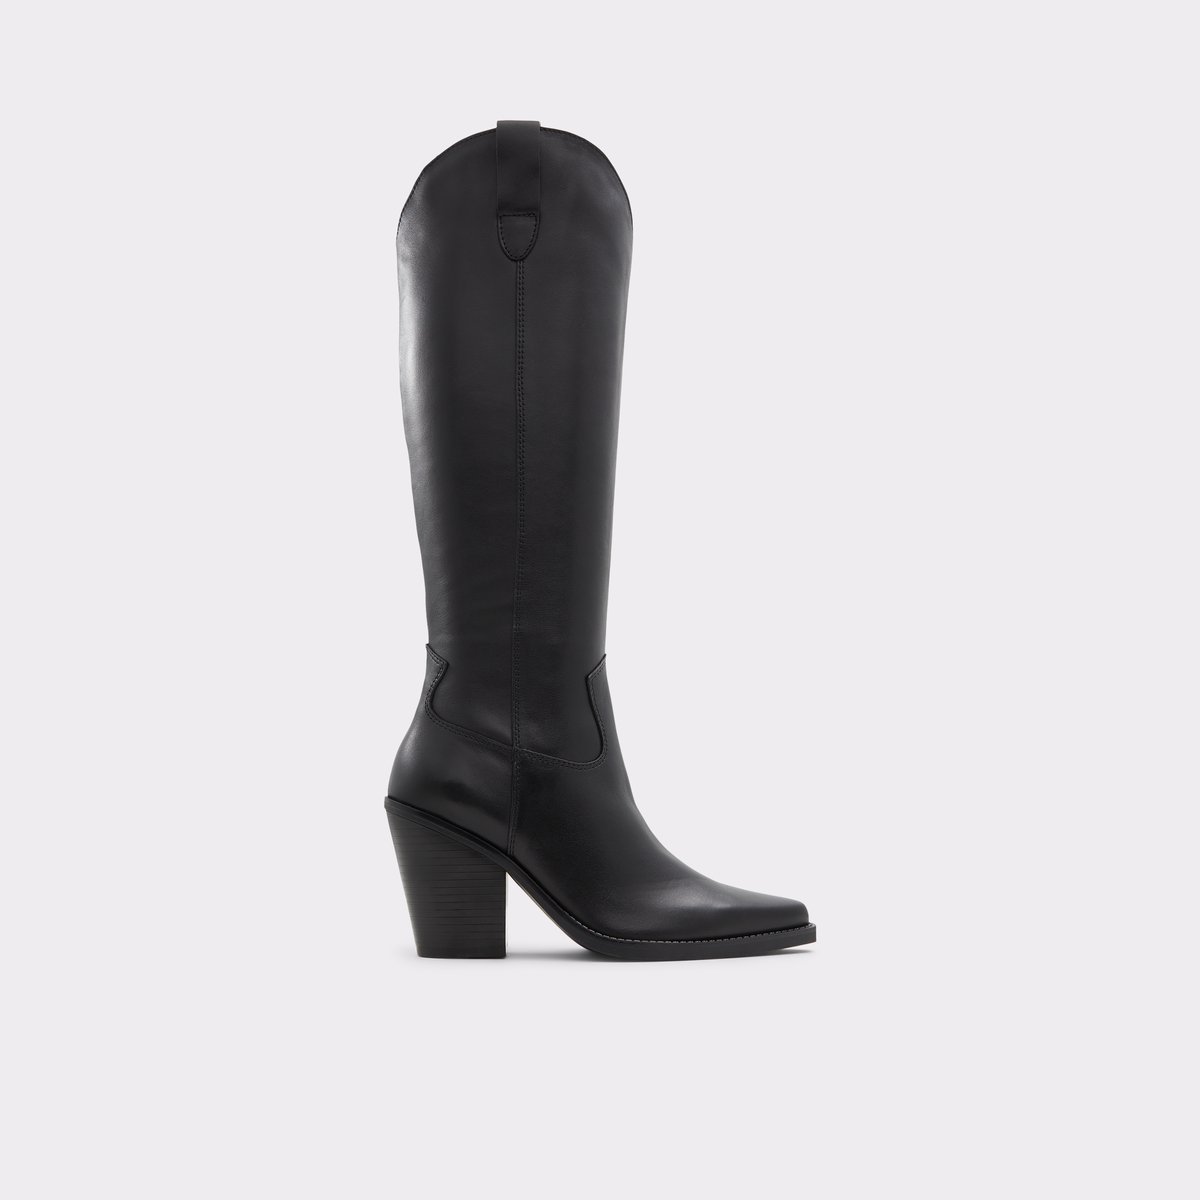 Nevada Black Leather Smooth Women's Tall Boots | ALDO Canada